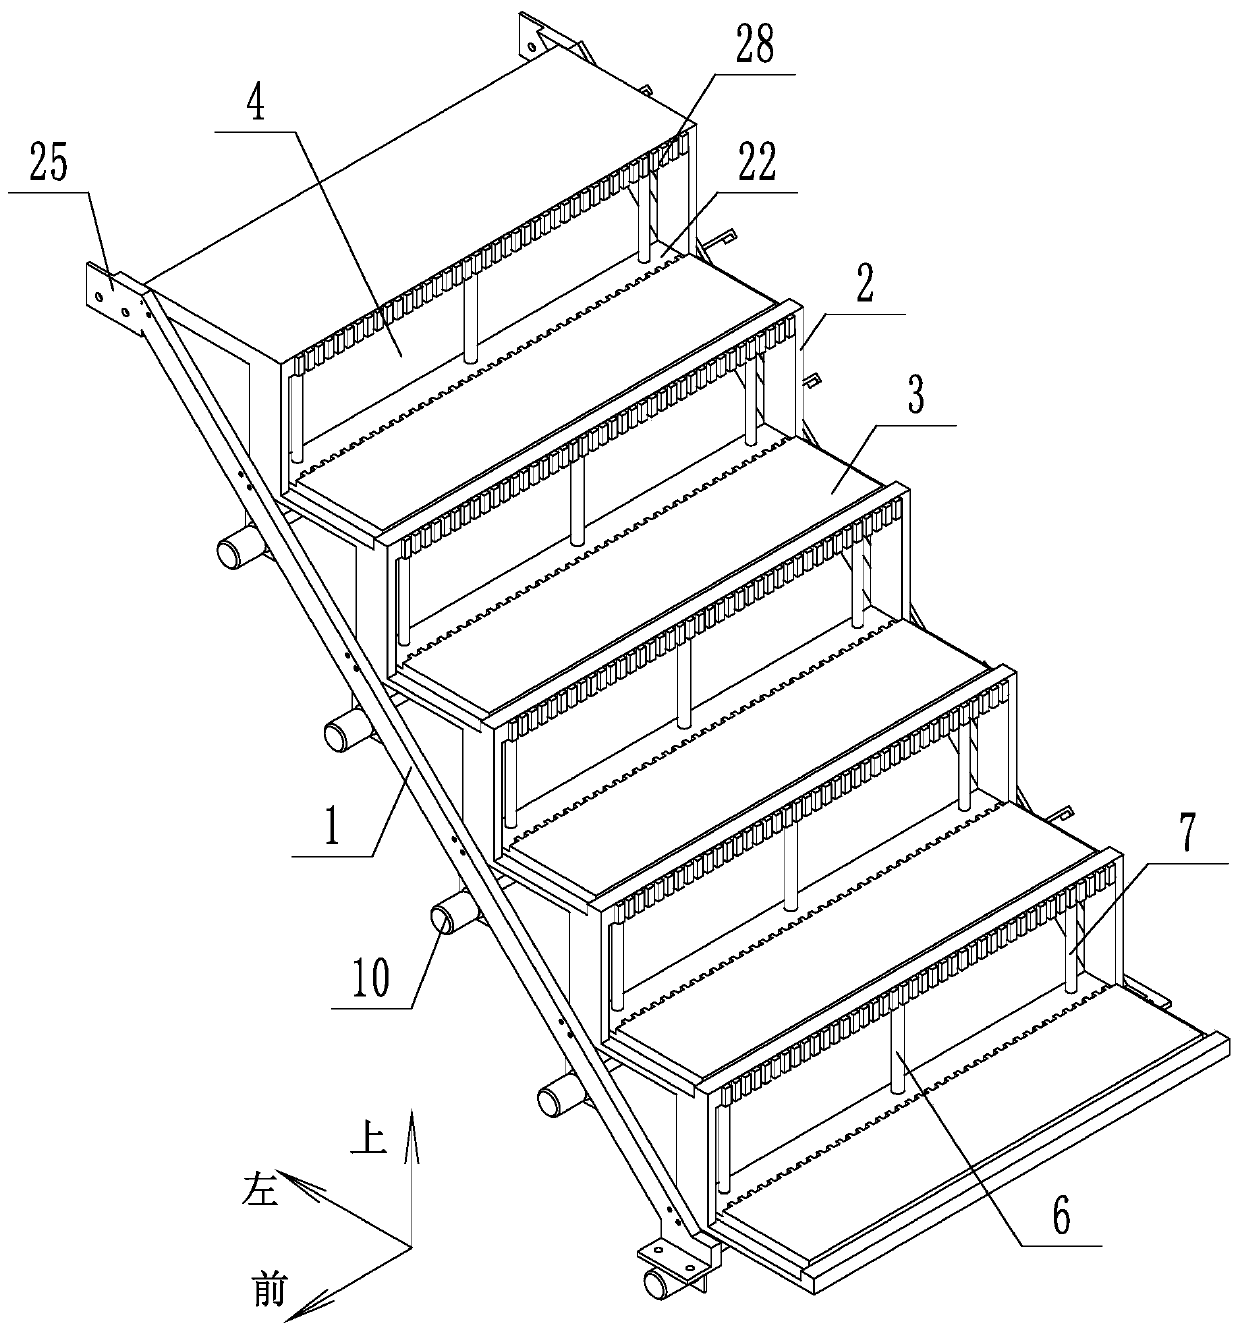 A staircase with automatically ascending and descending steps